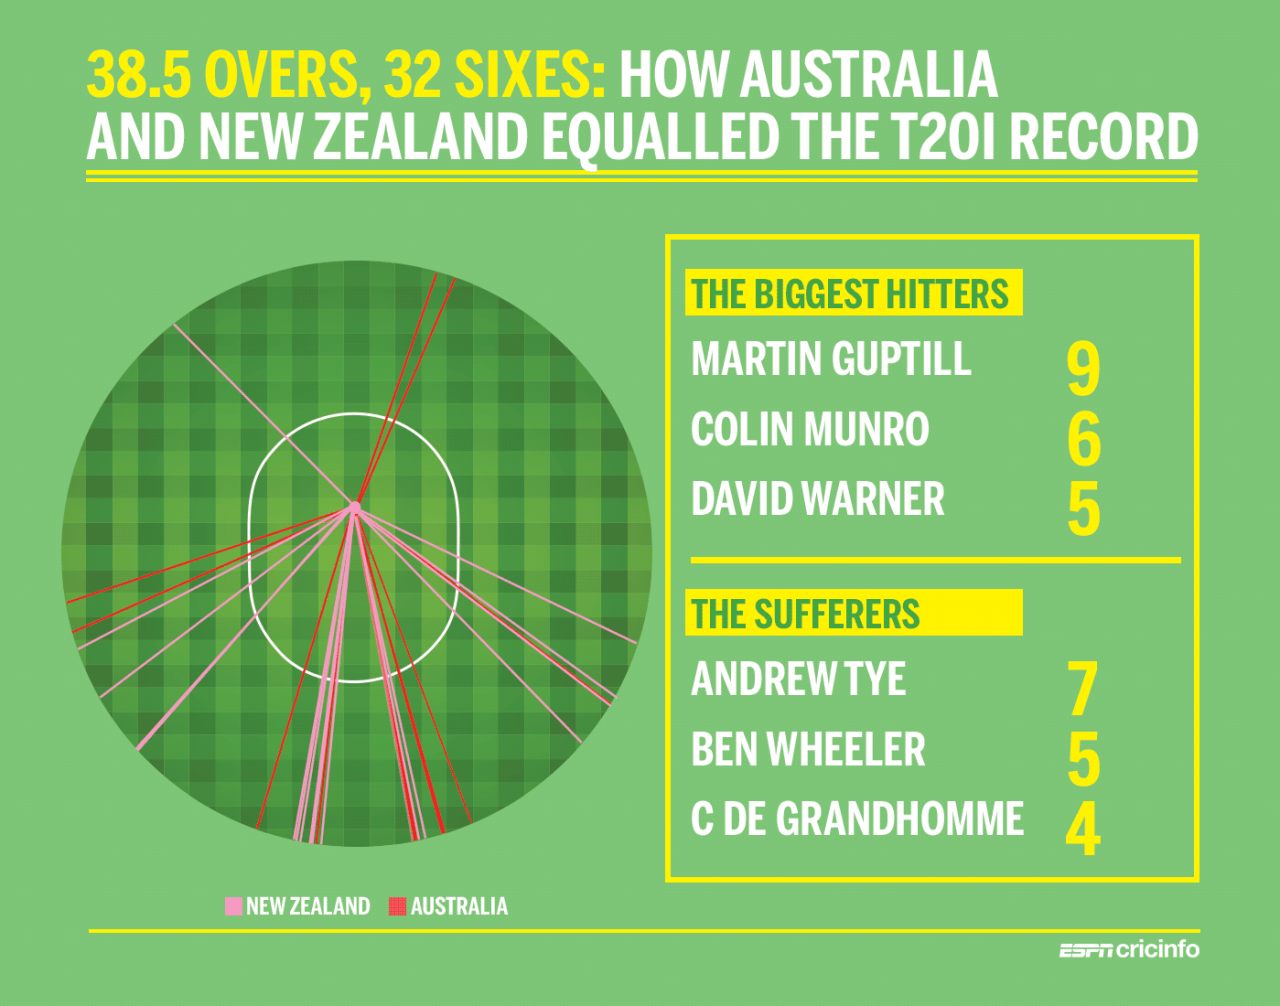 Australia and New Zealand combined to equal the record for the most sixes in a T20 international